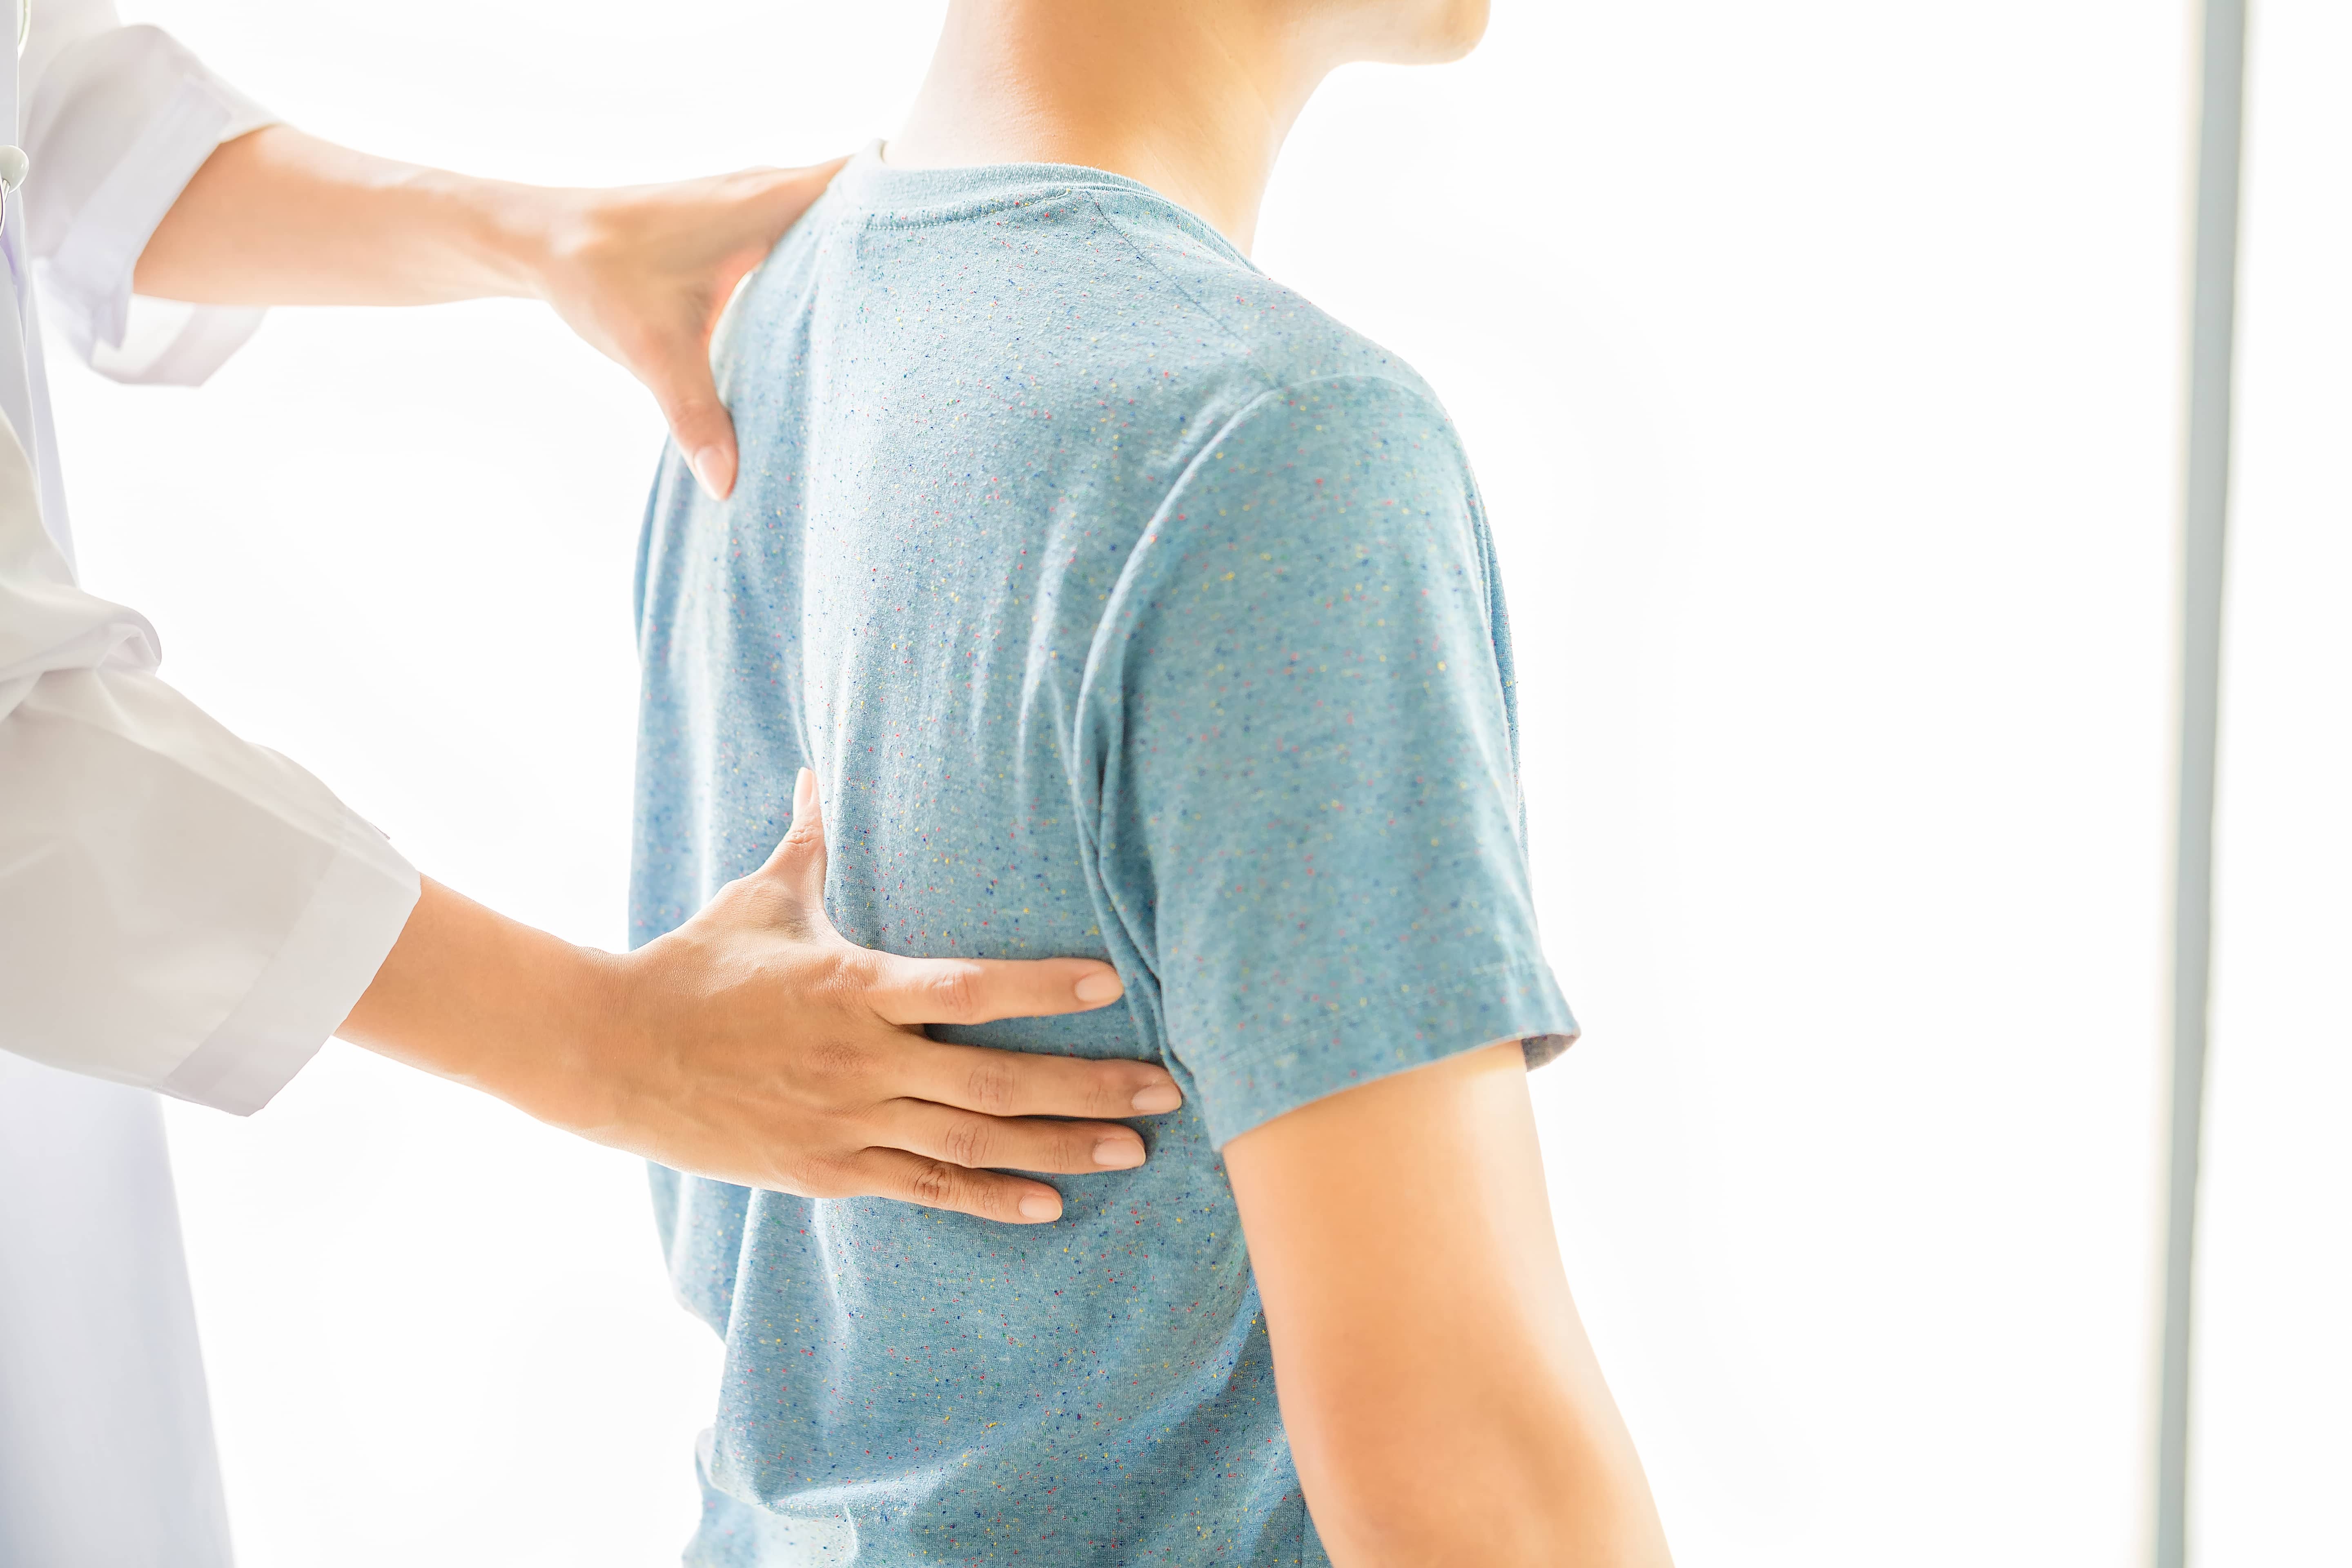 Everything Regarding Physiotherapy That You Should Know